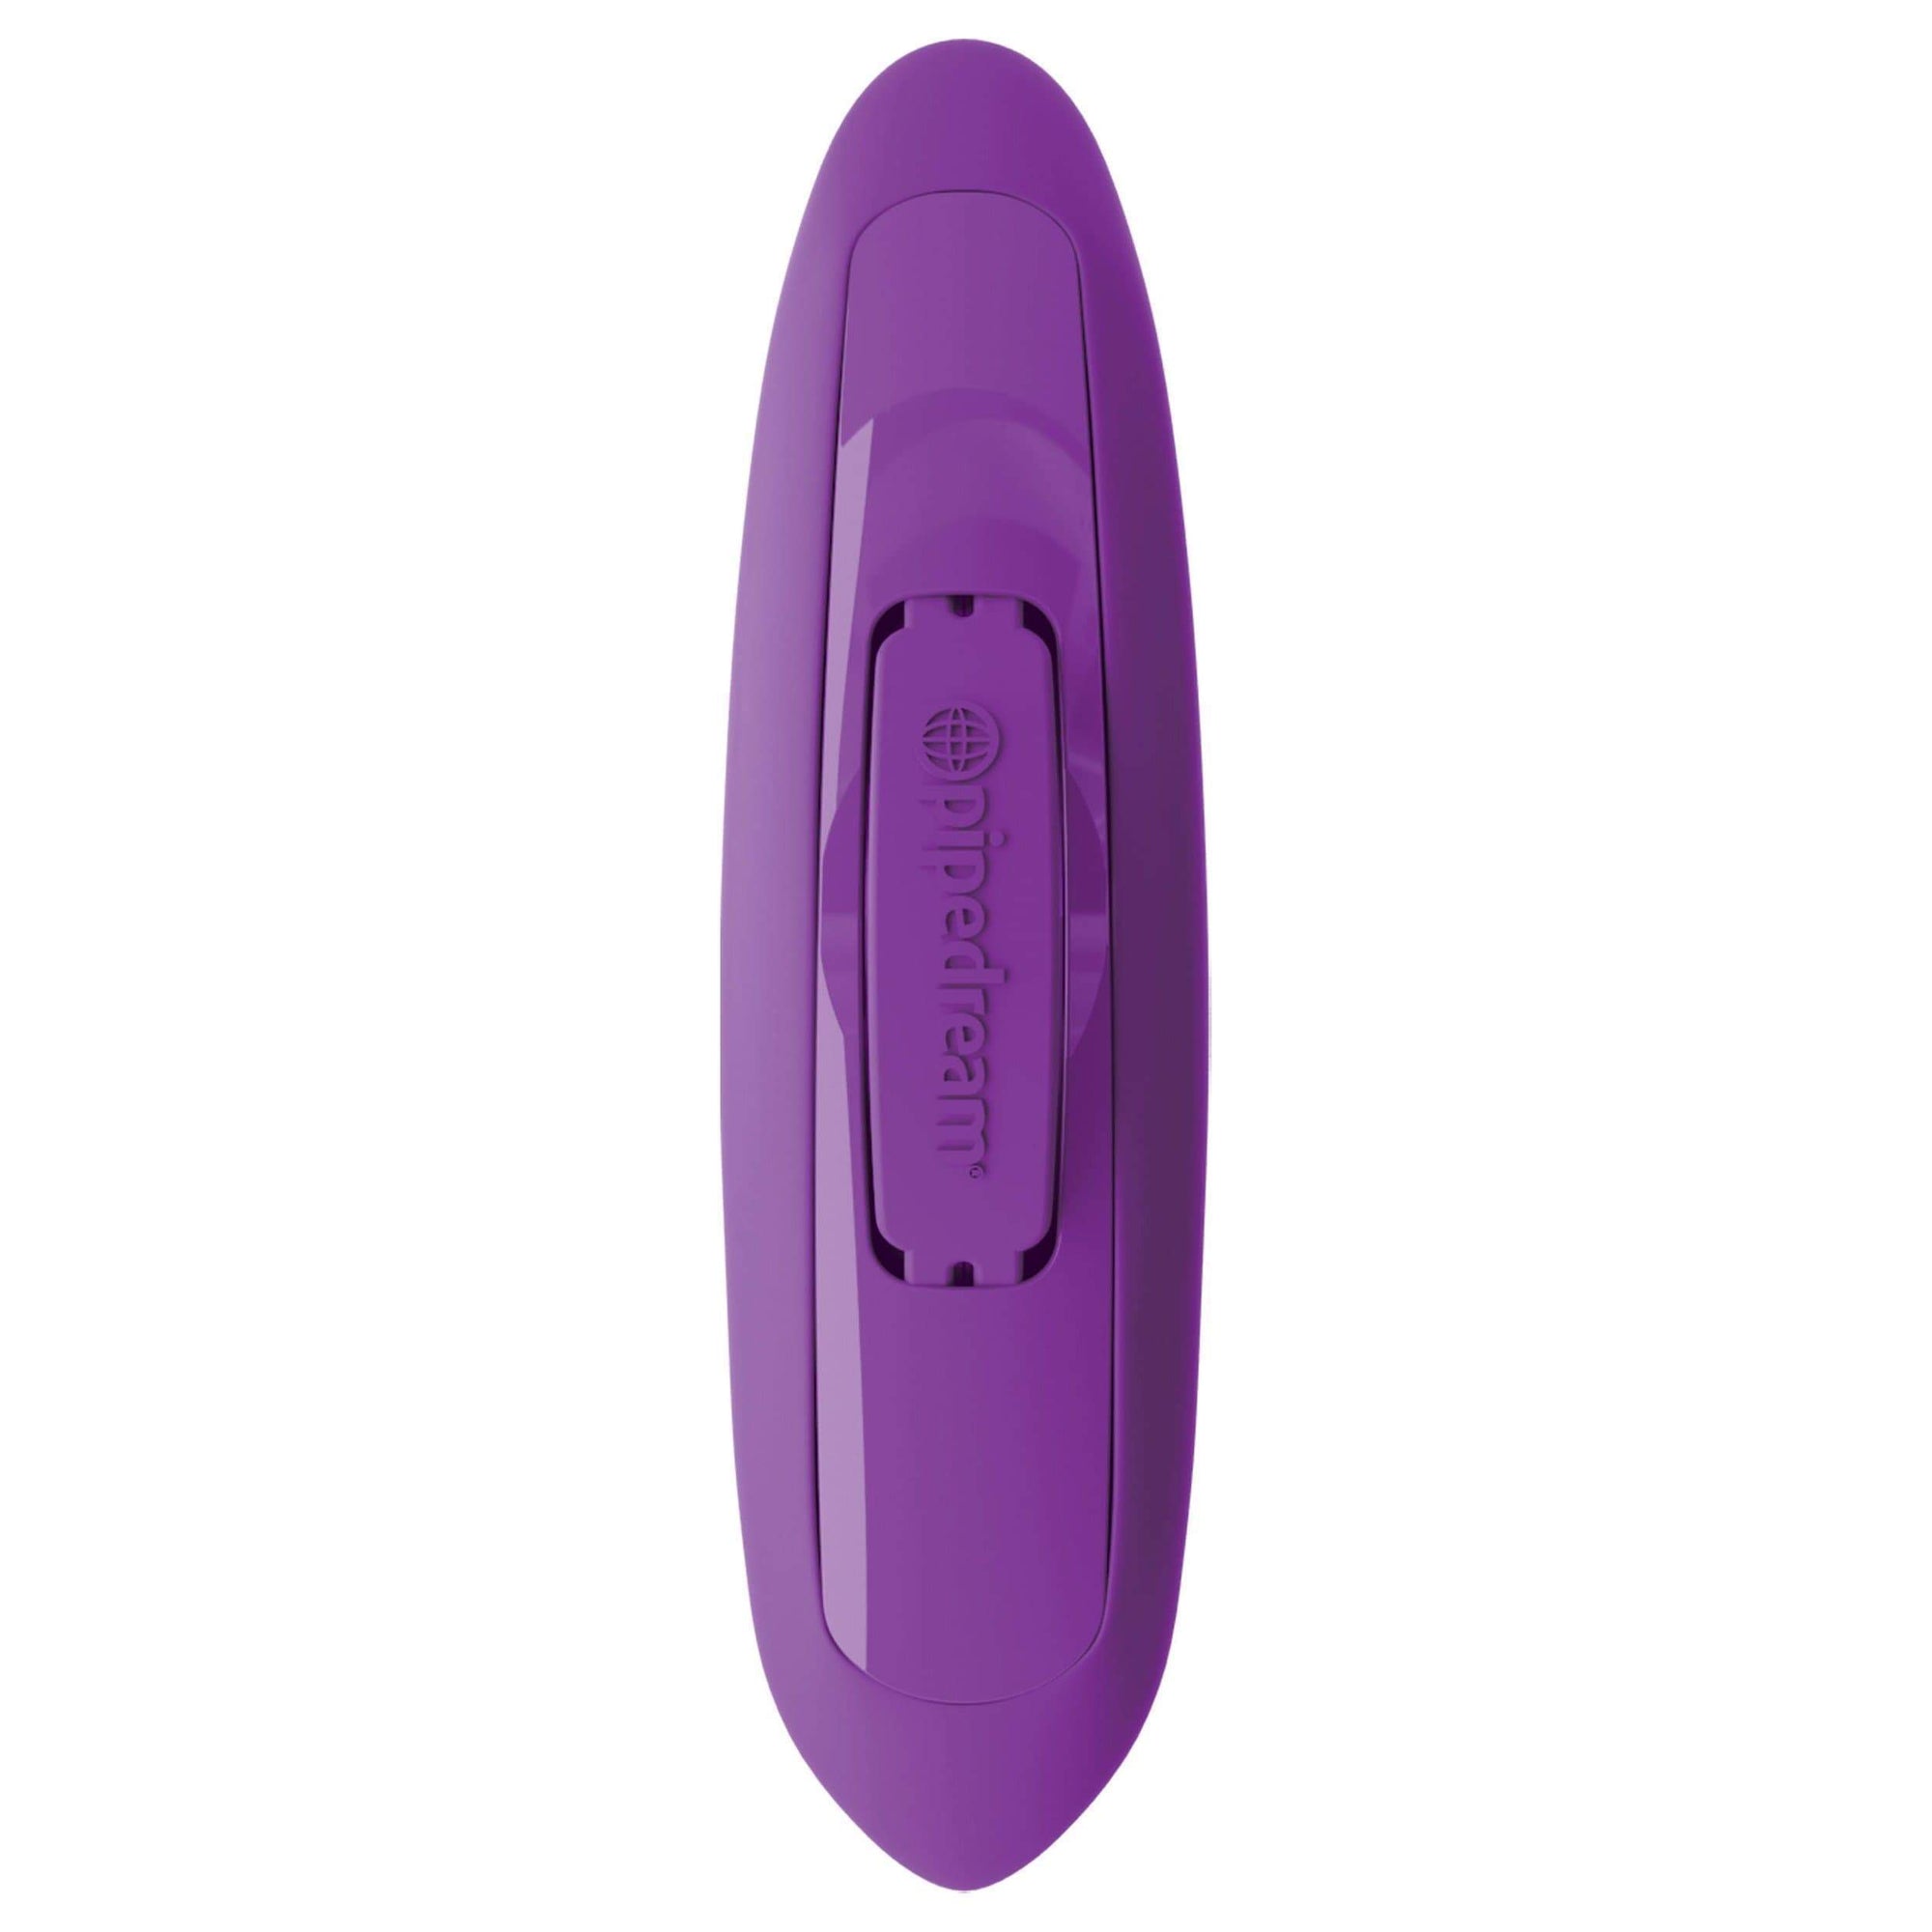 Pipedream - 3Some Myself and Us Rock N Ride Silicone Vibrator (Purple) Couple's Massager (Vibration) Rechargeable 603912761788 CherryAffairs